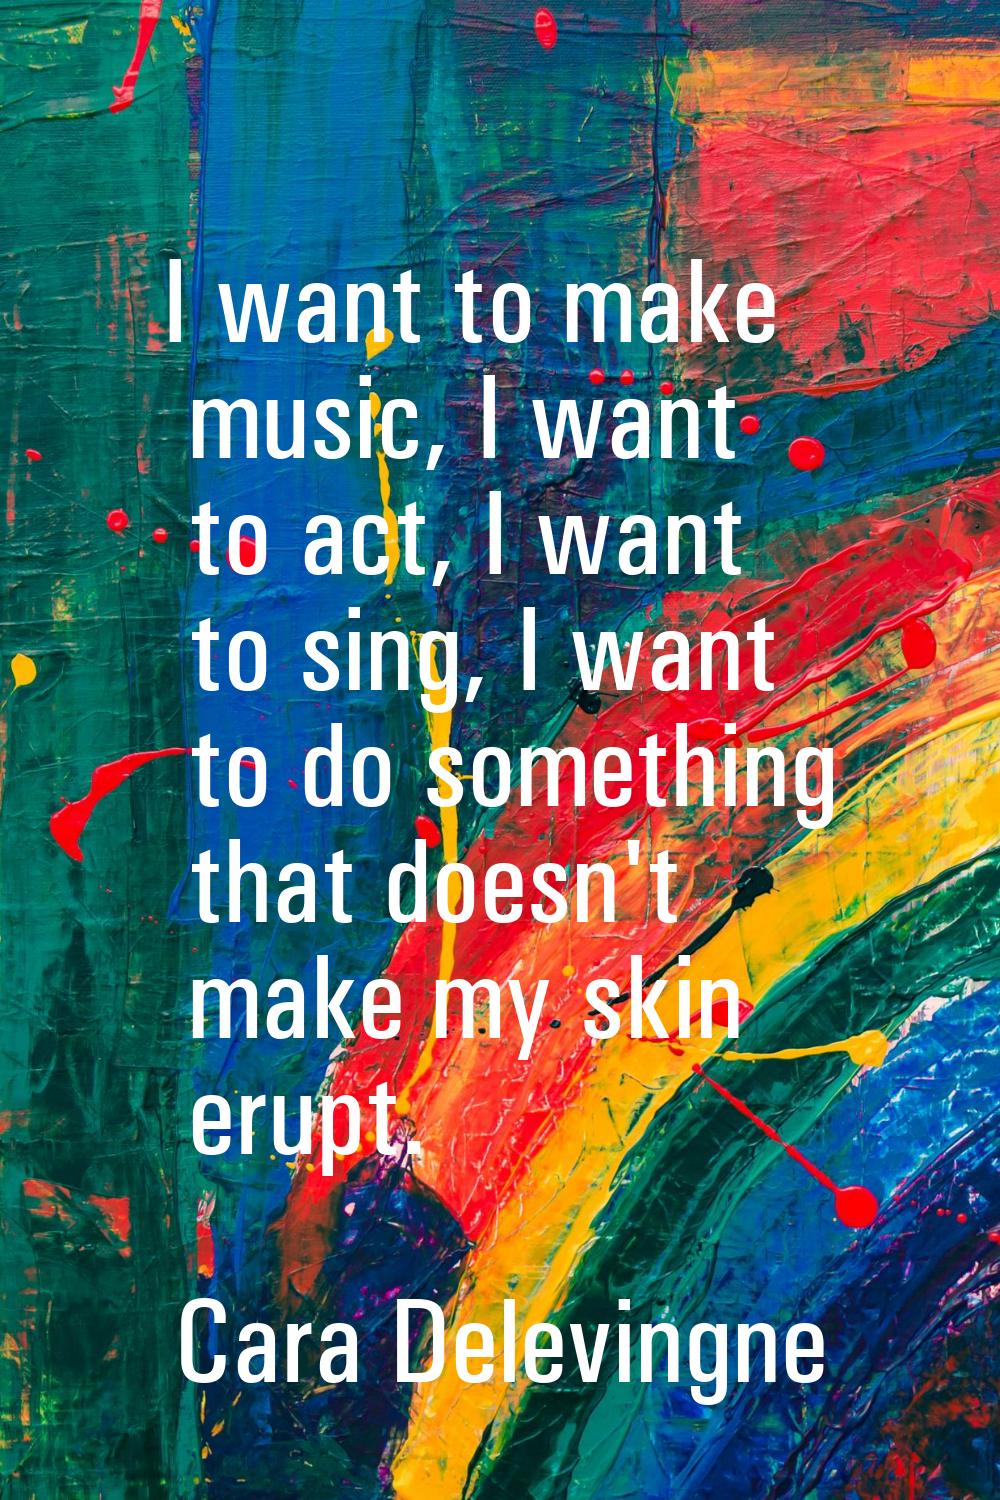 I want to make music, I want to act, I want to sing, I want to do something that doesn't make my sk